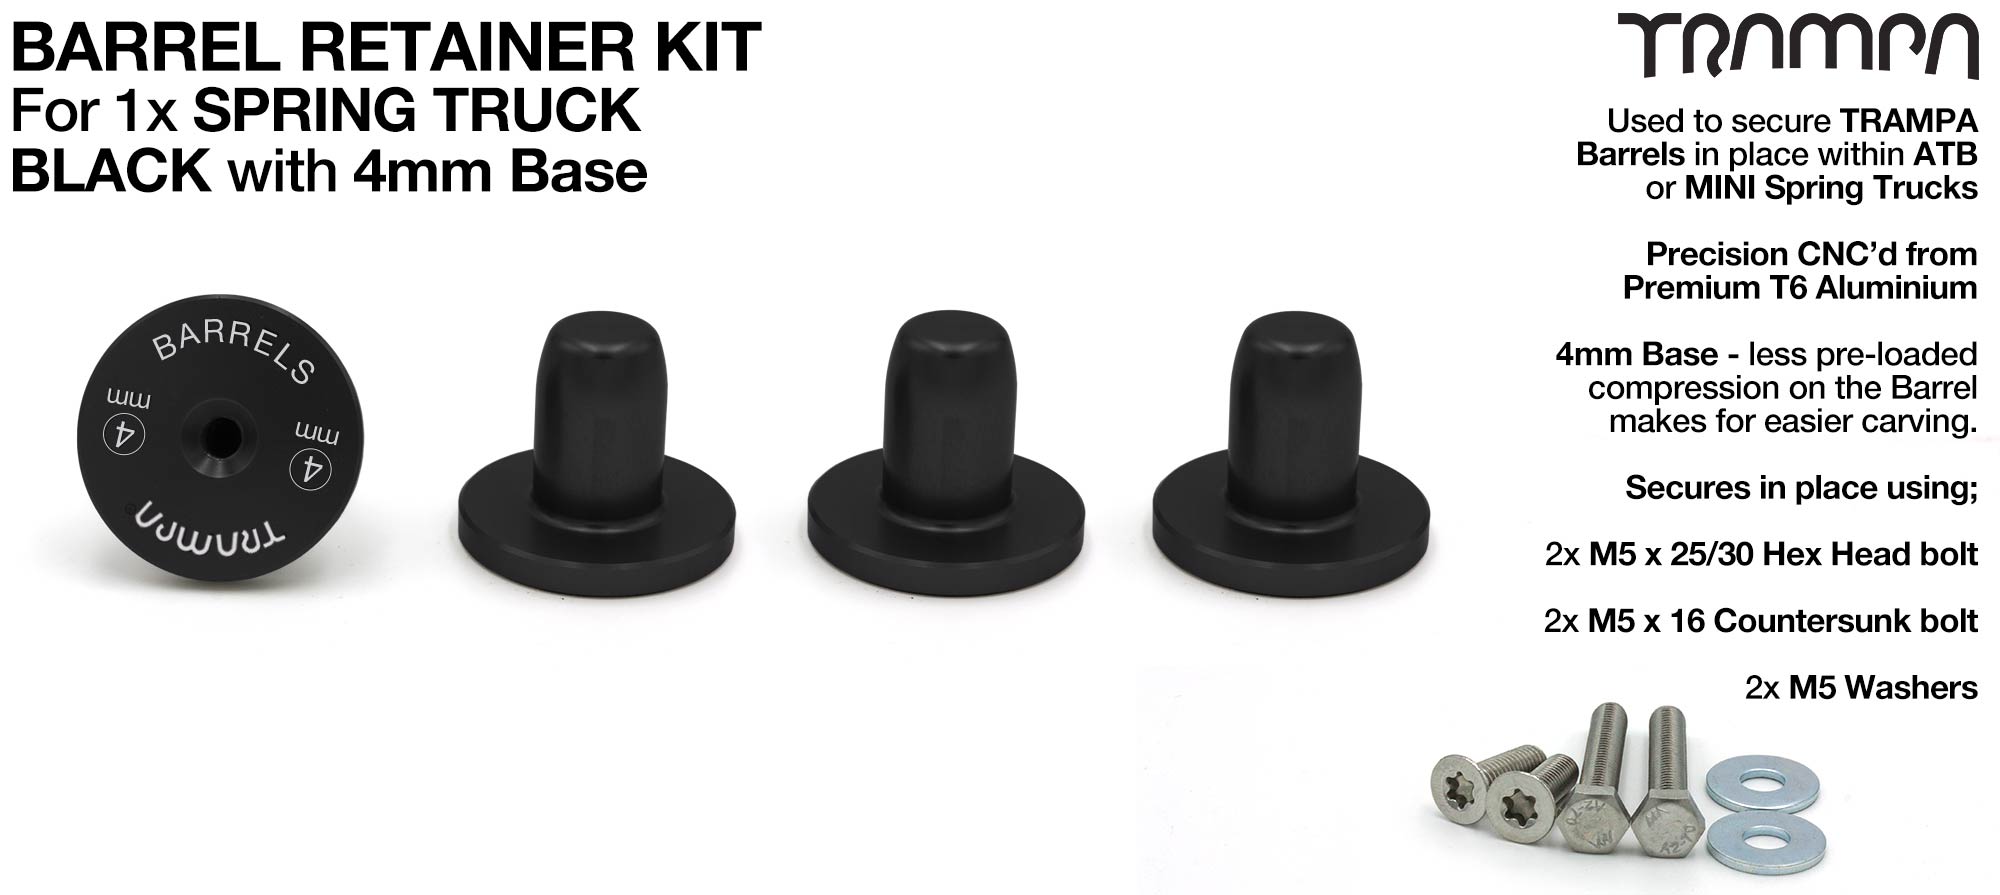 BLACK Barrel RETAINERS x4 with 4mm Base 